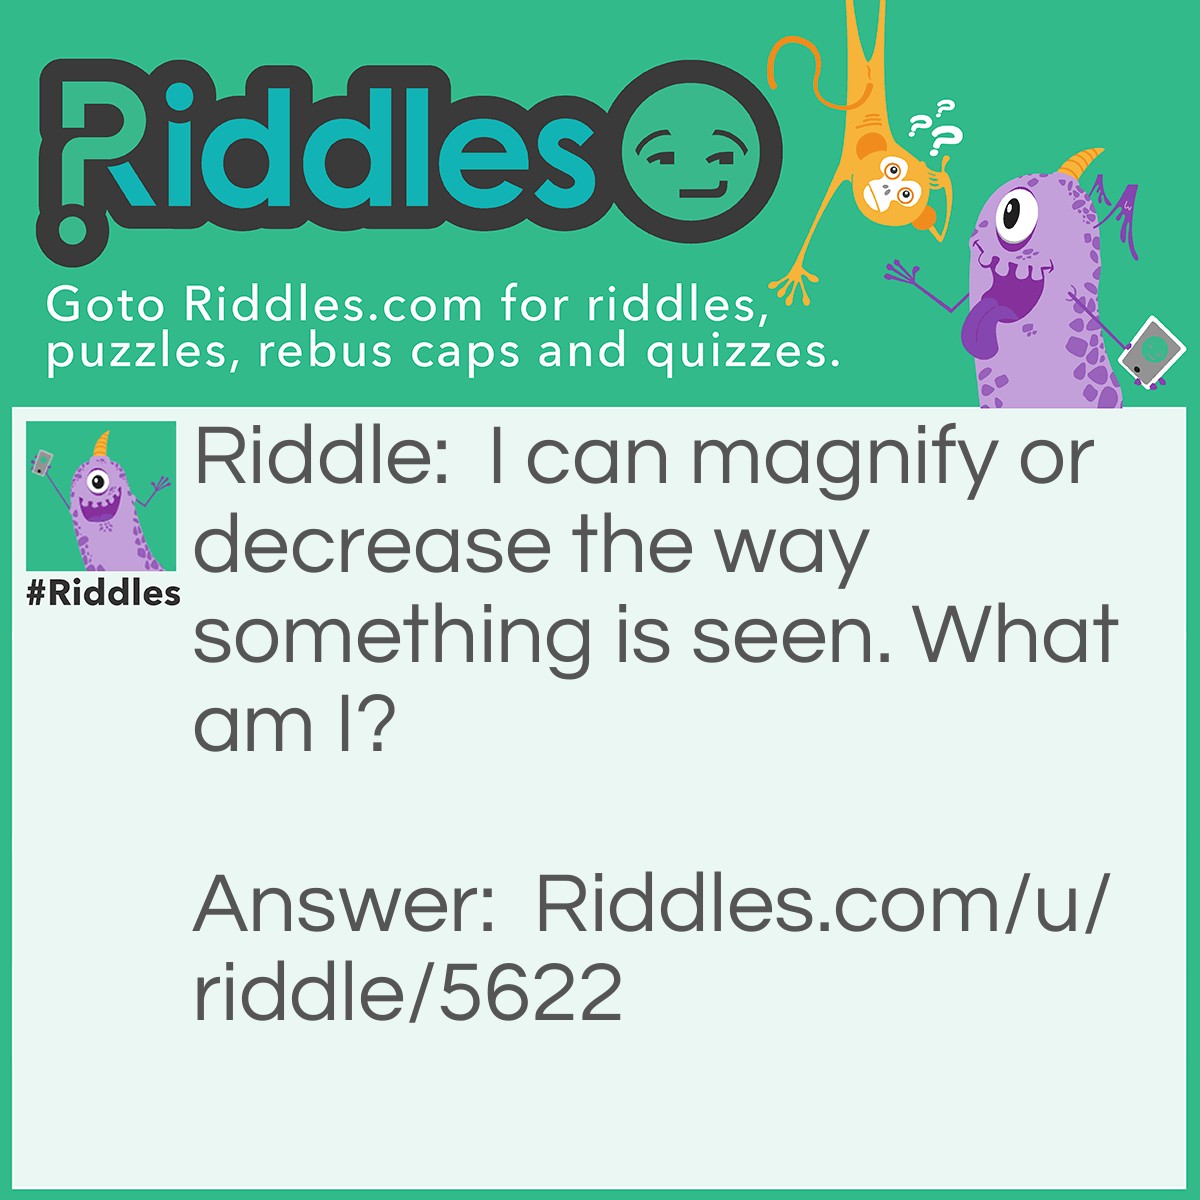 Riddle: I can magnify or decrease the way something is seen. What am I? Answer: Glasses